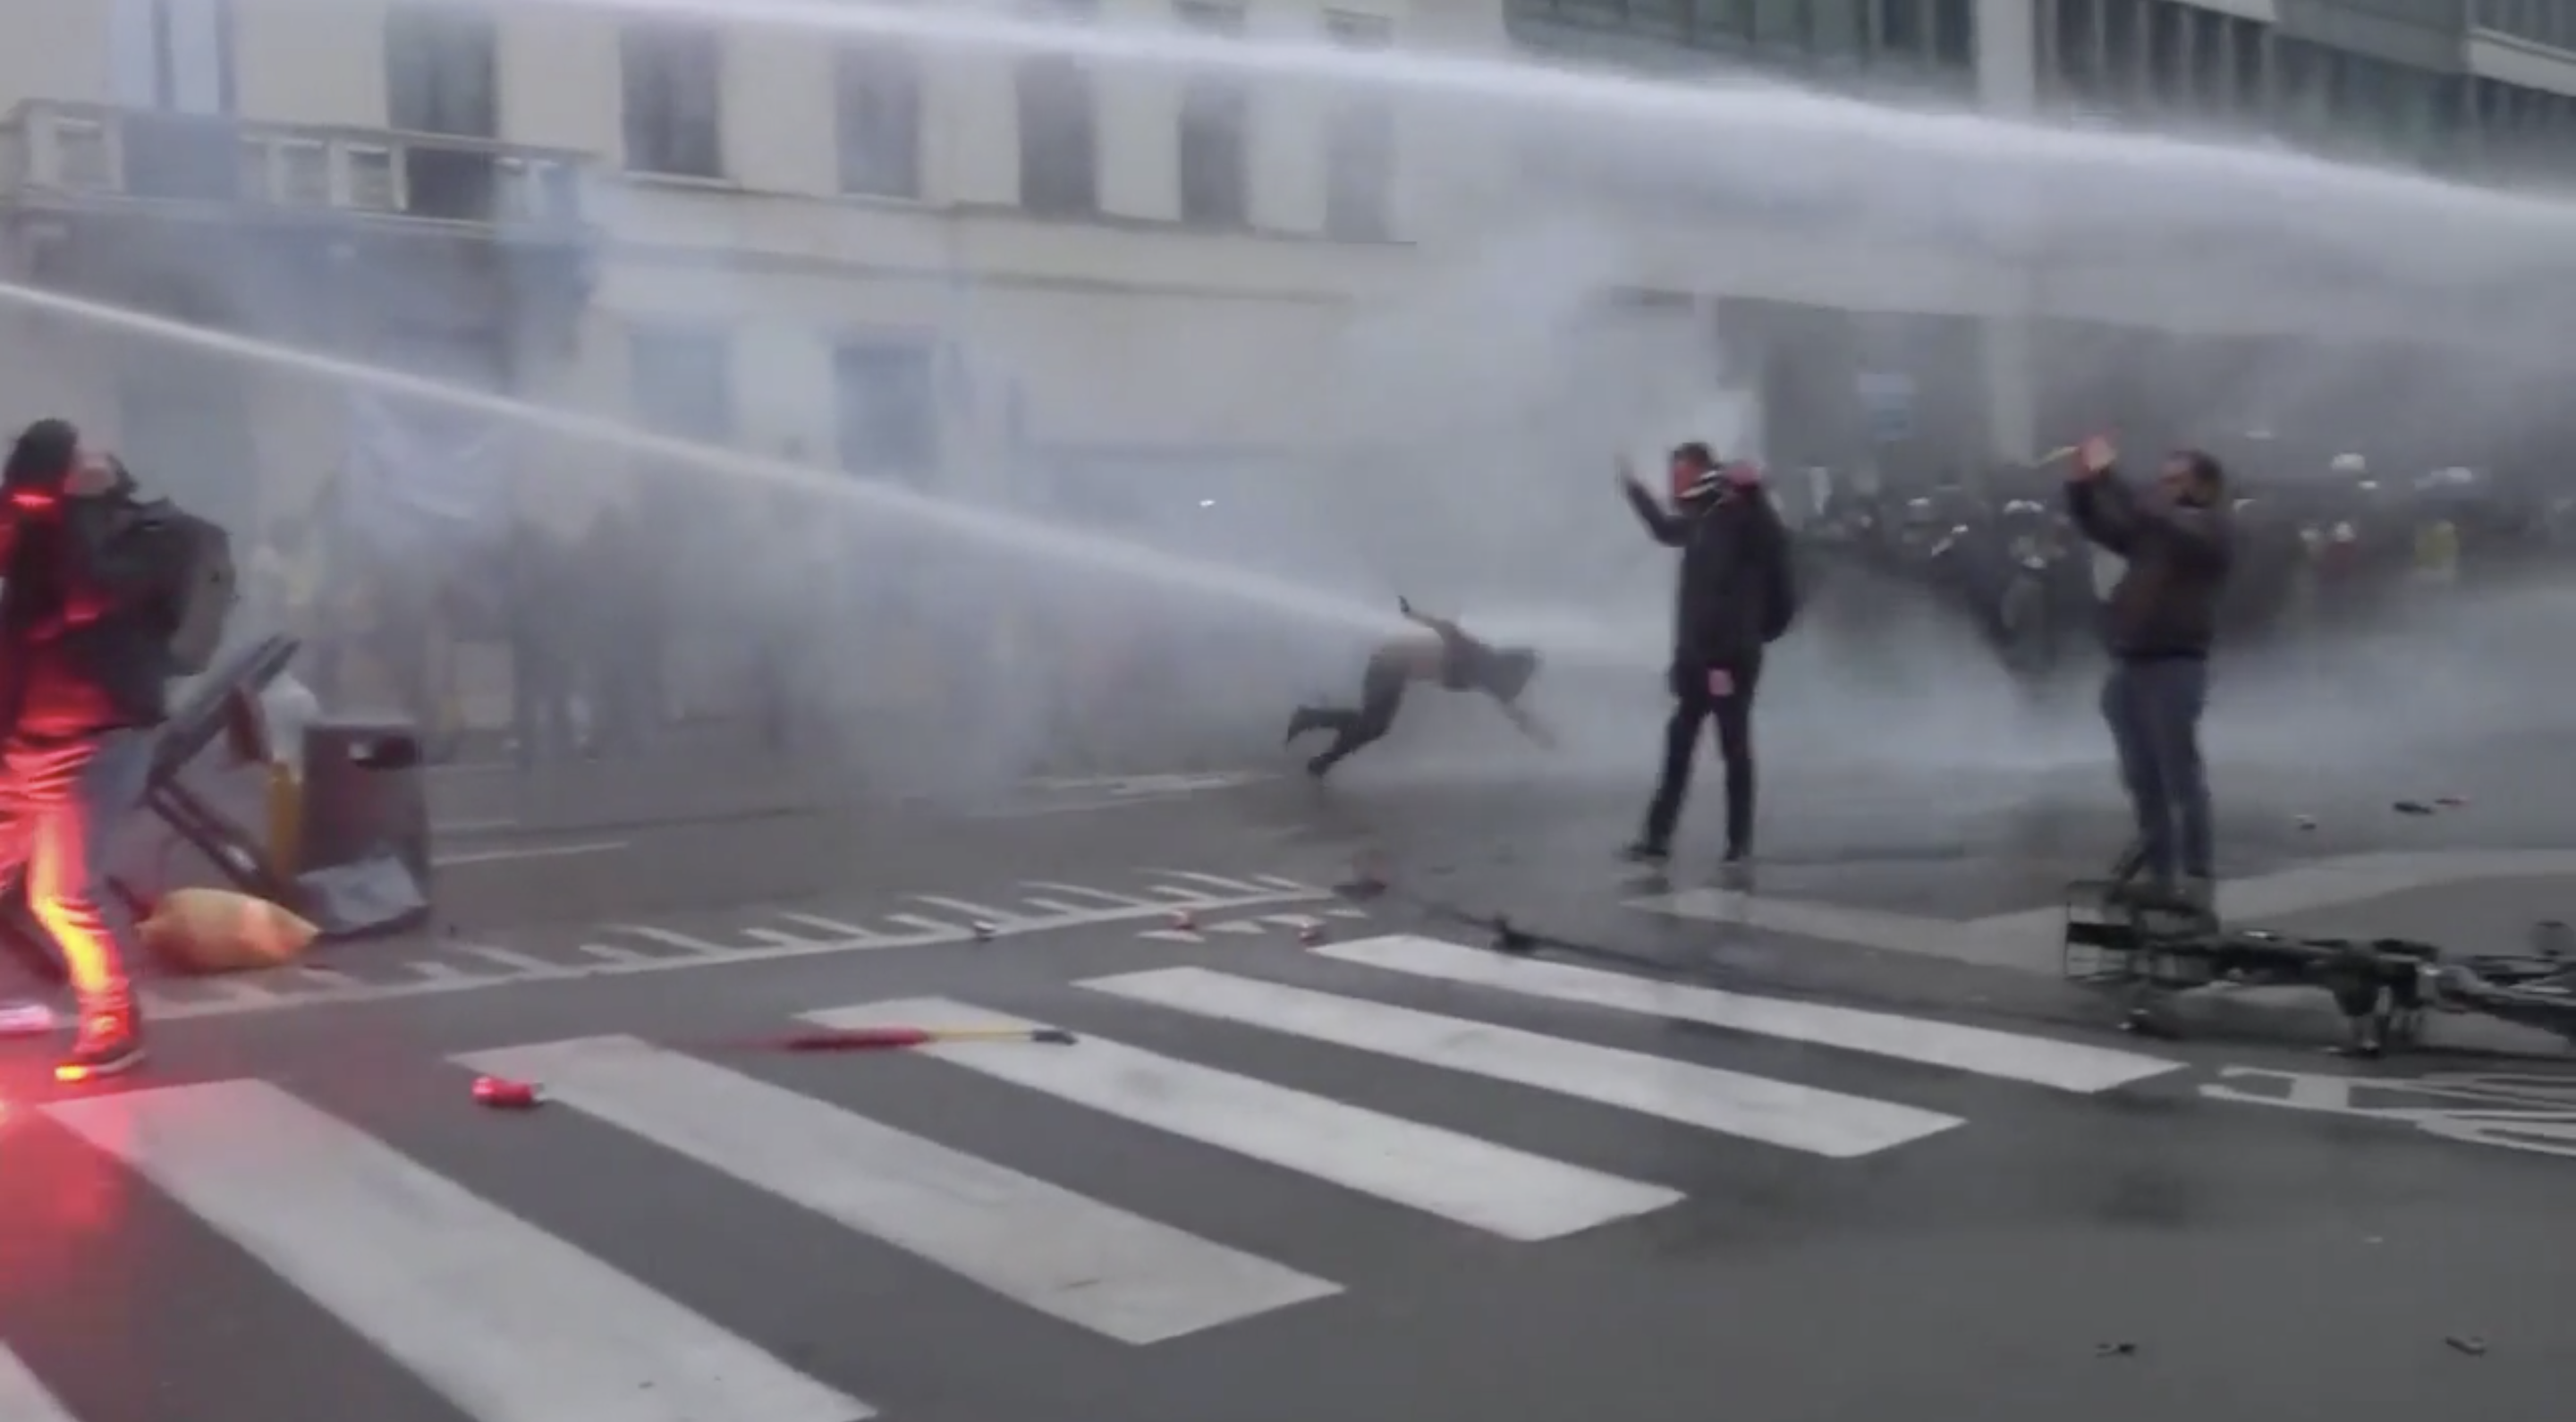 Brussels, man sent flying by water canon, Dec 5 2021